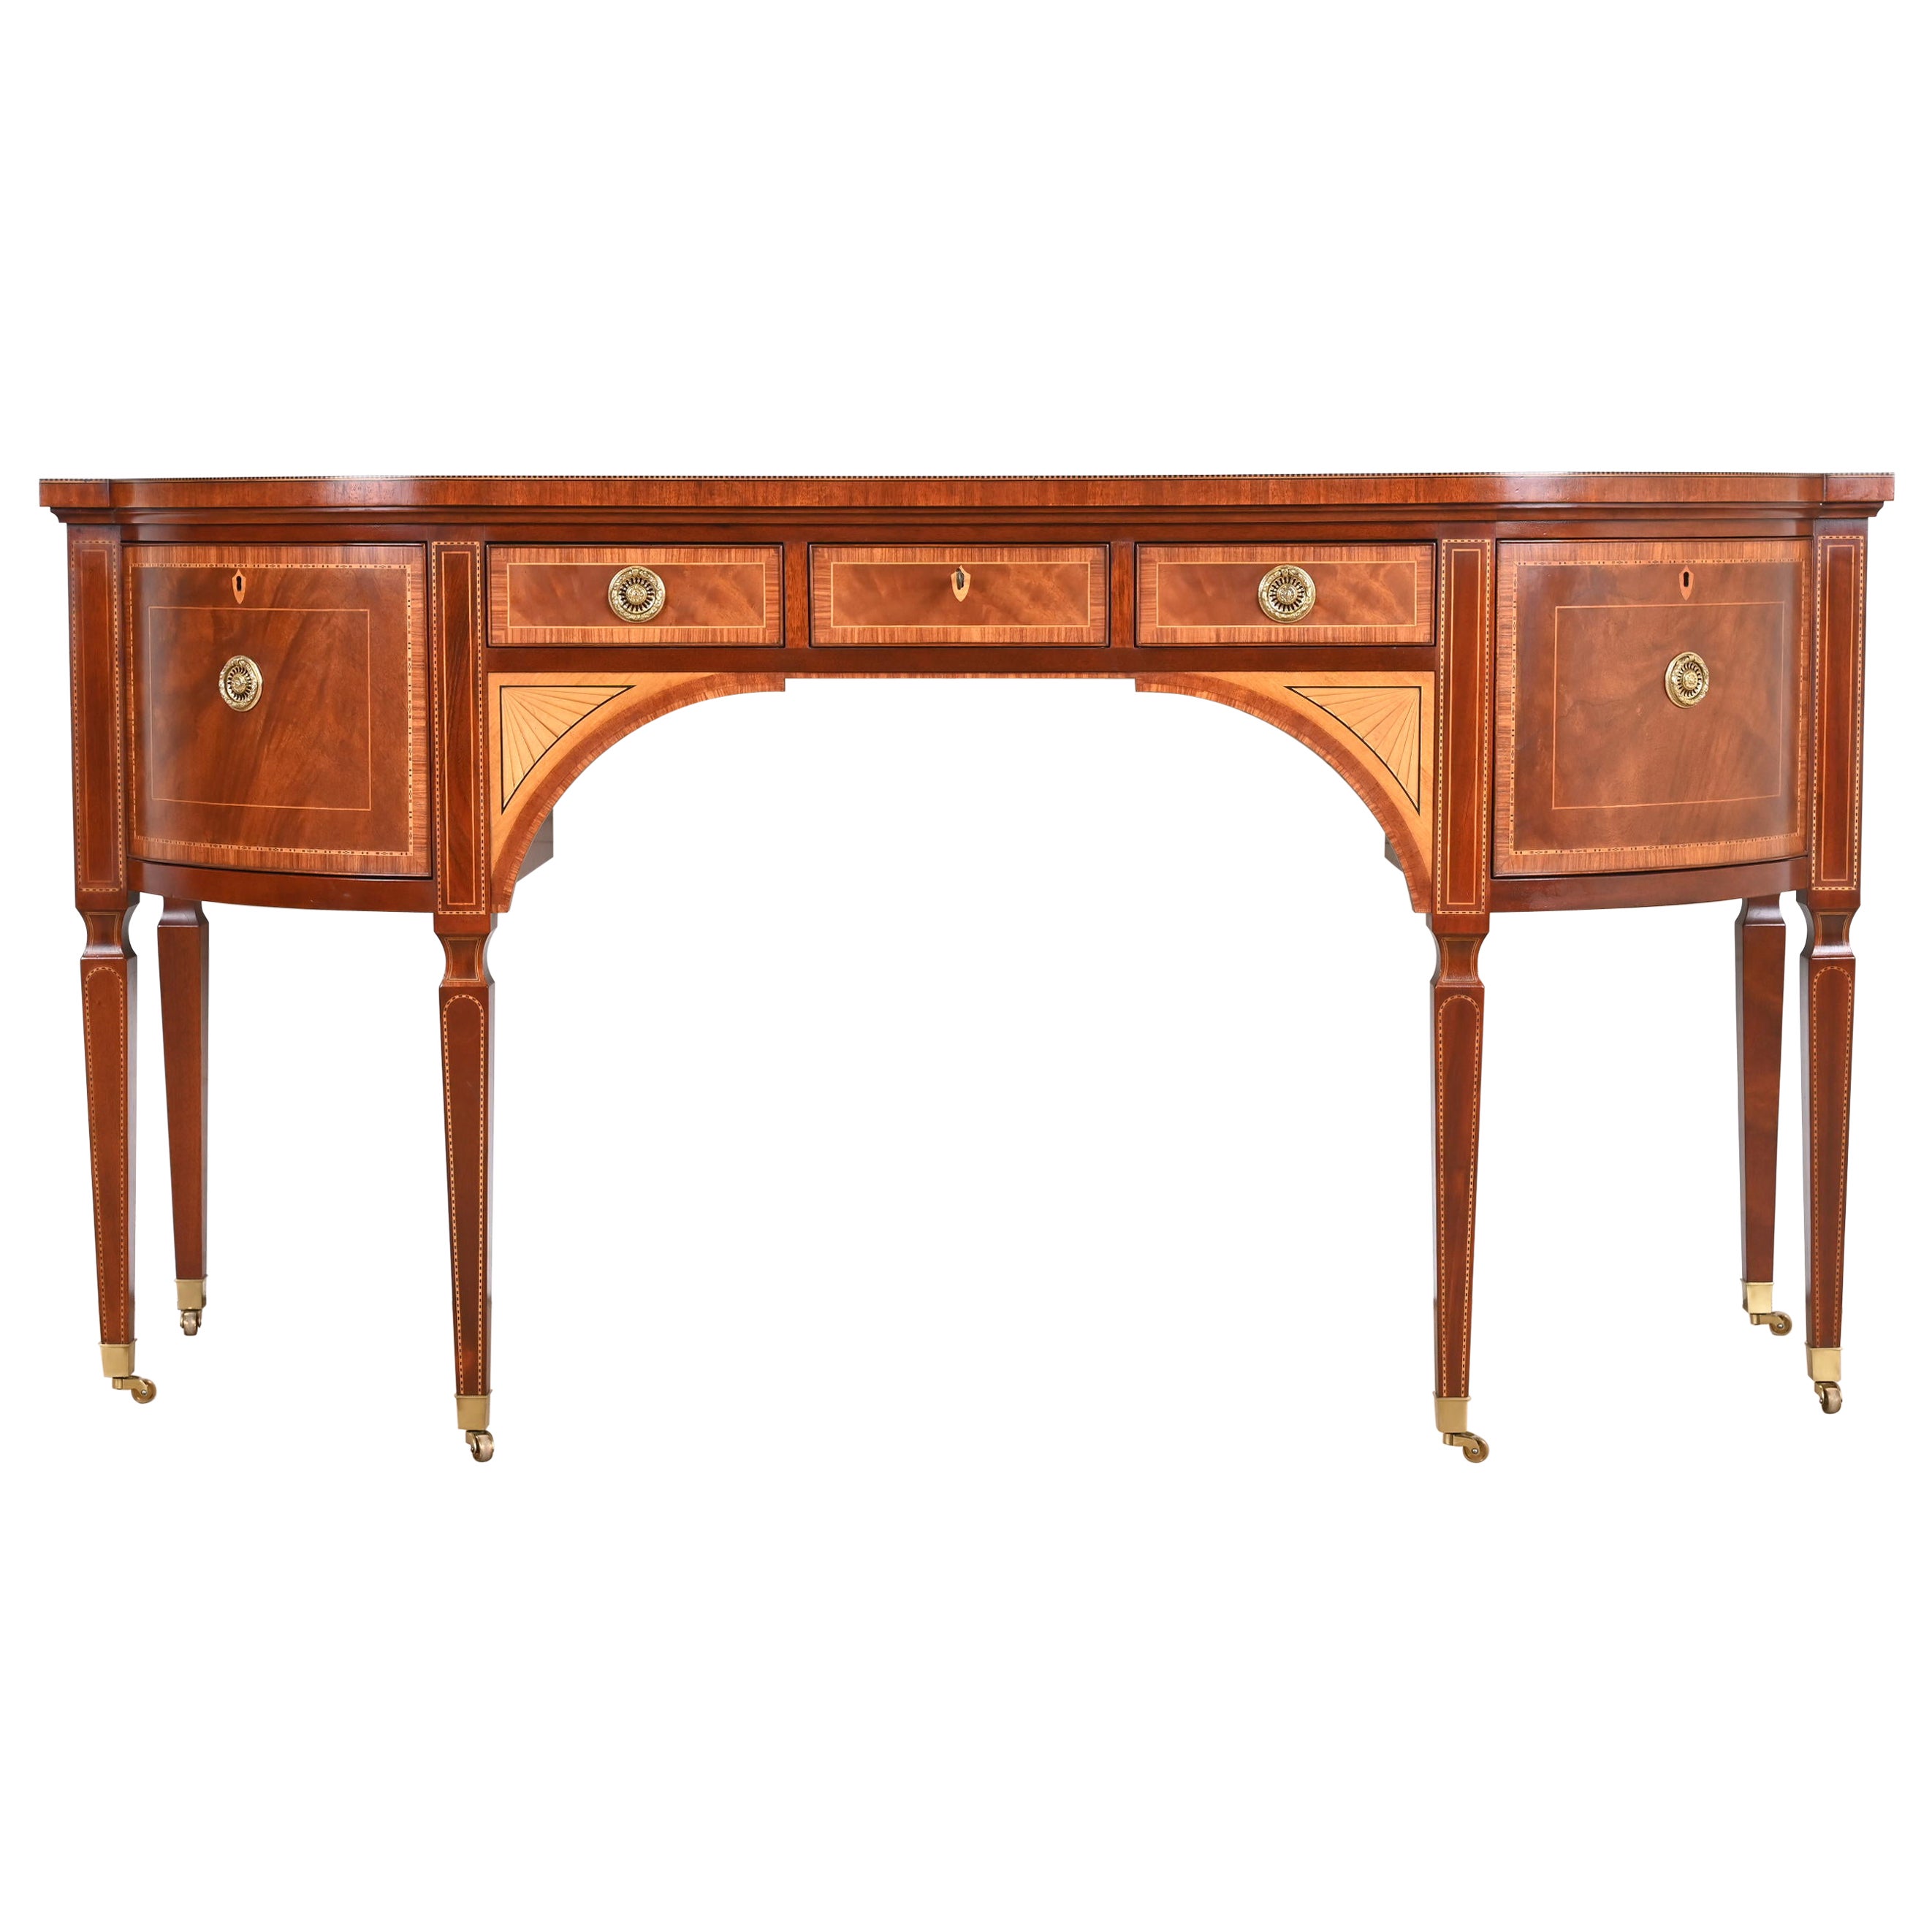 Baker Furniture Stately Homes Sheraton Bow Front Inlaid Mahogany Sideboard For Sale